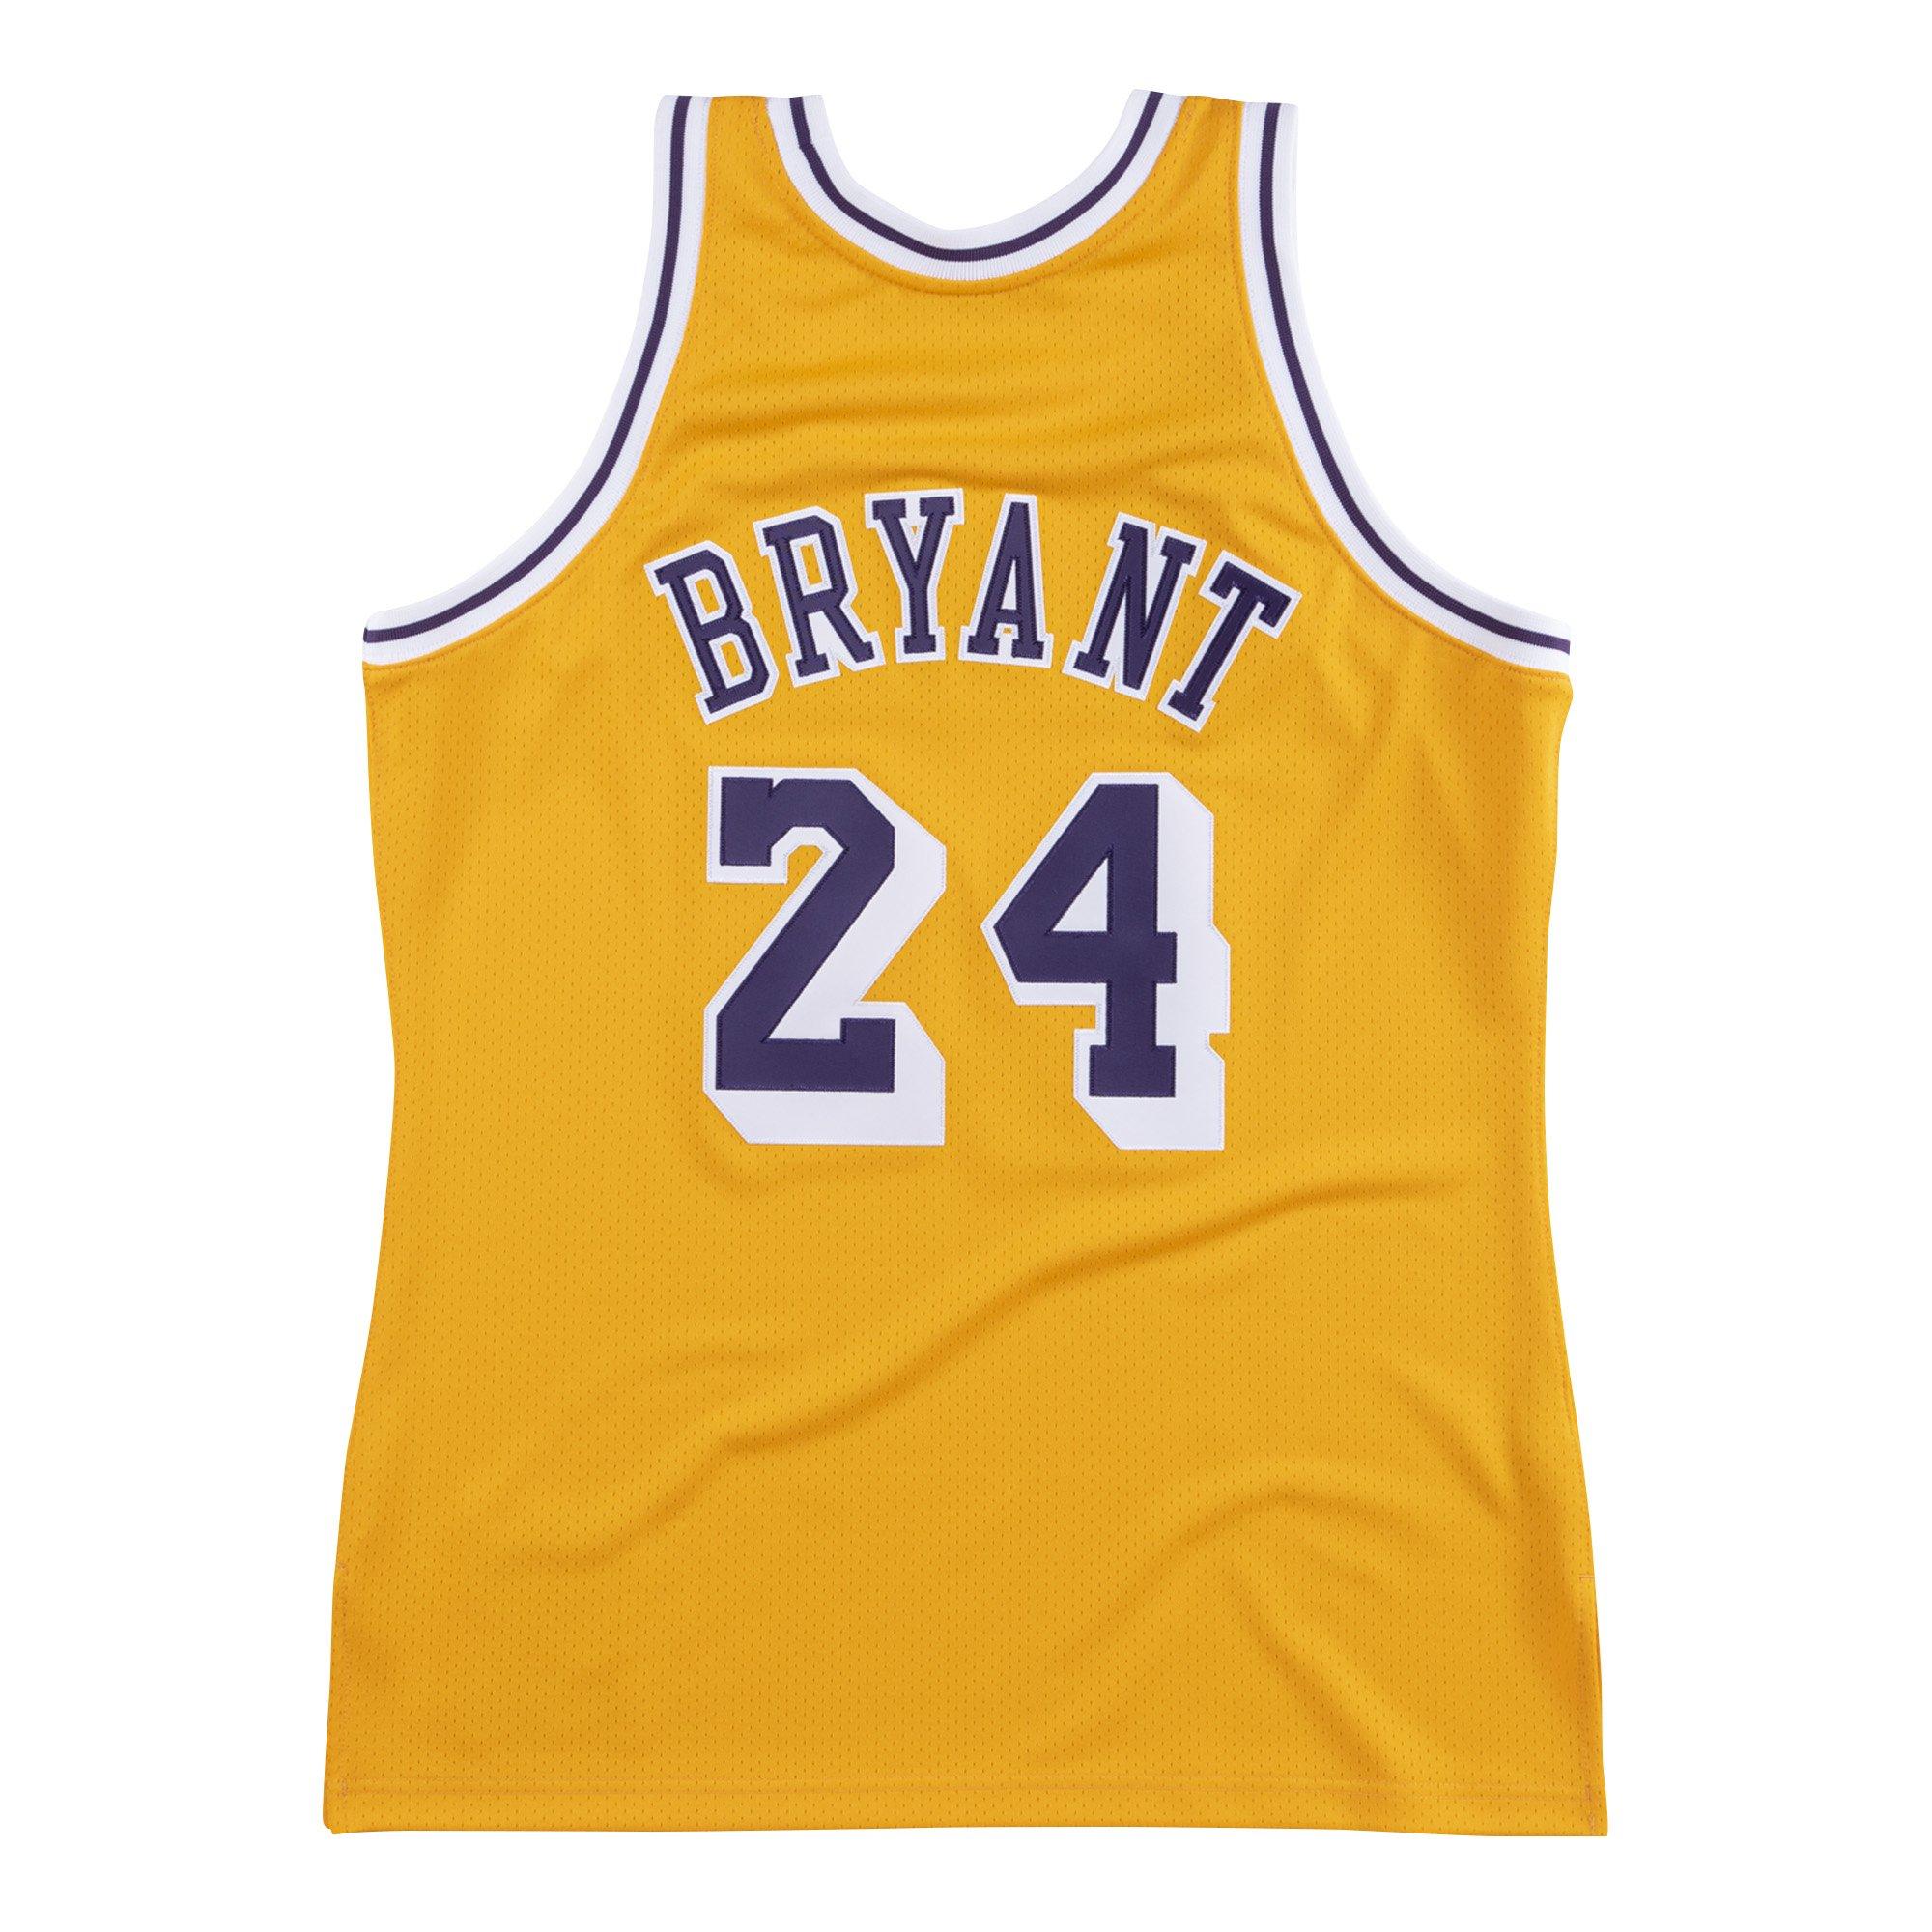 official kobe bryant jersey